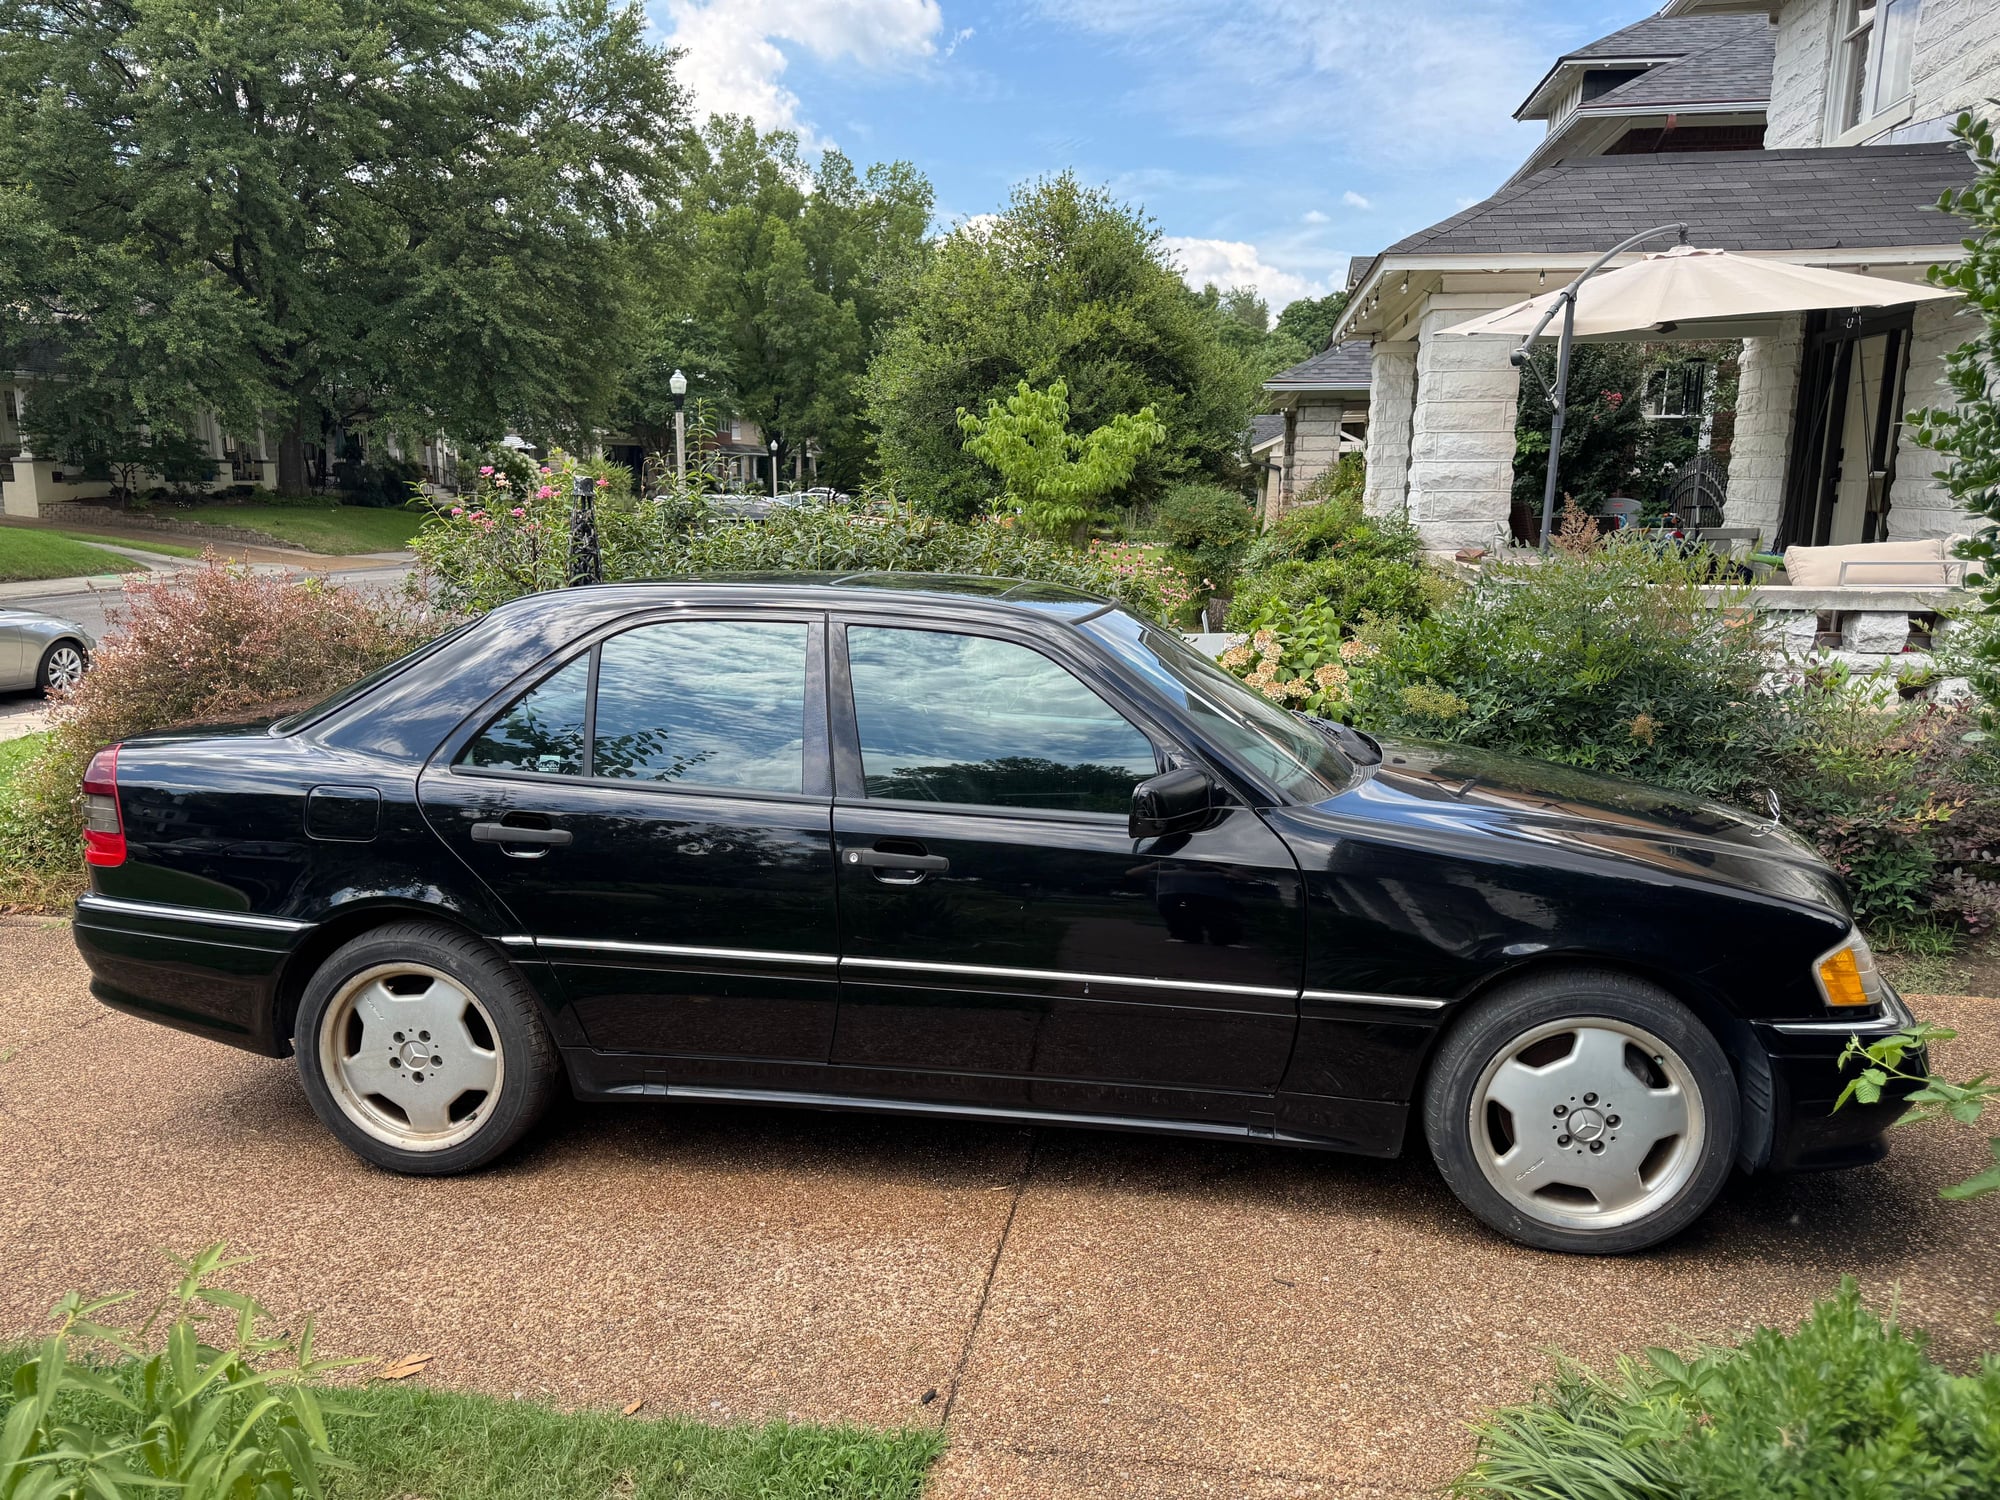 1997 Mercedes-Benz C36 AMG - For Sale: 1997 C36 AMG in Memphis, Tennessee - Used - Memphis, TN 38112, United States